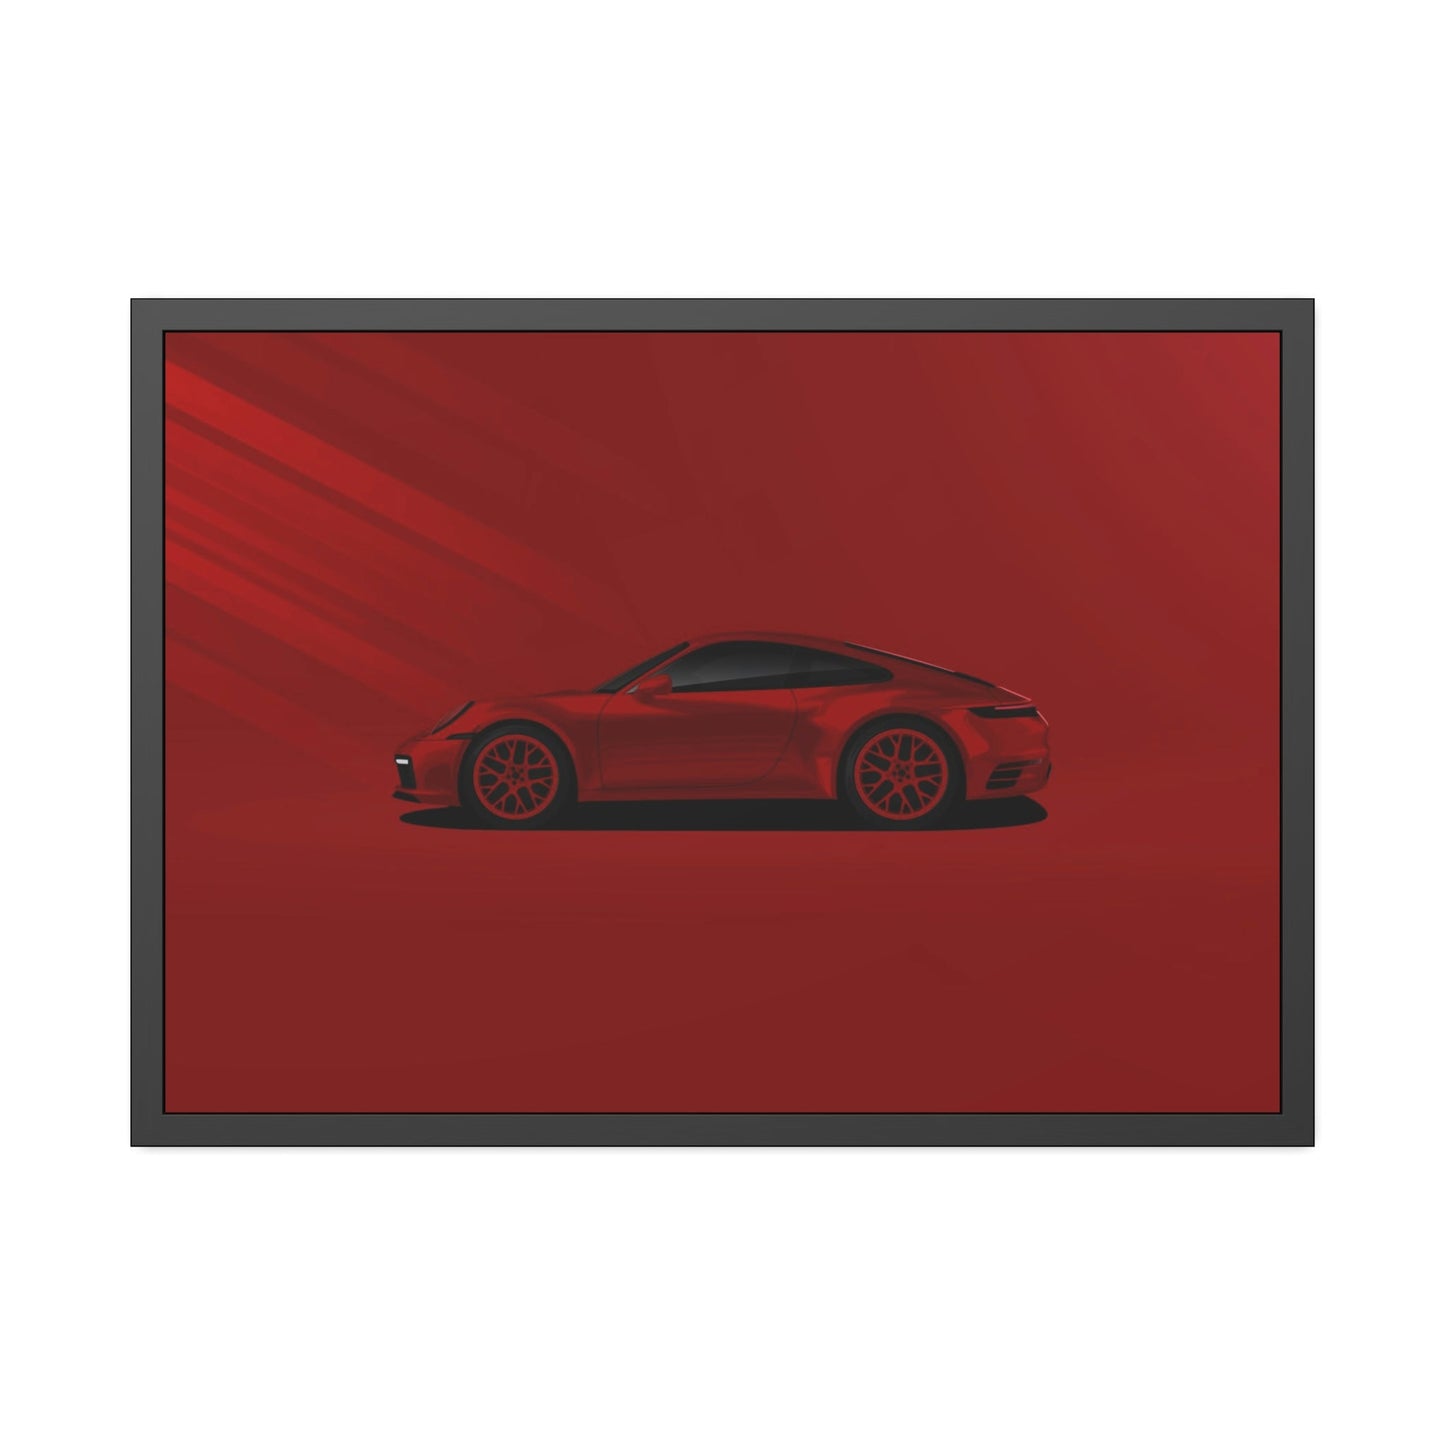 Porsche's Vibrant Energy: A Print on Canvas & Poster for Inspiration